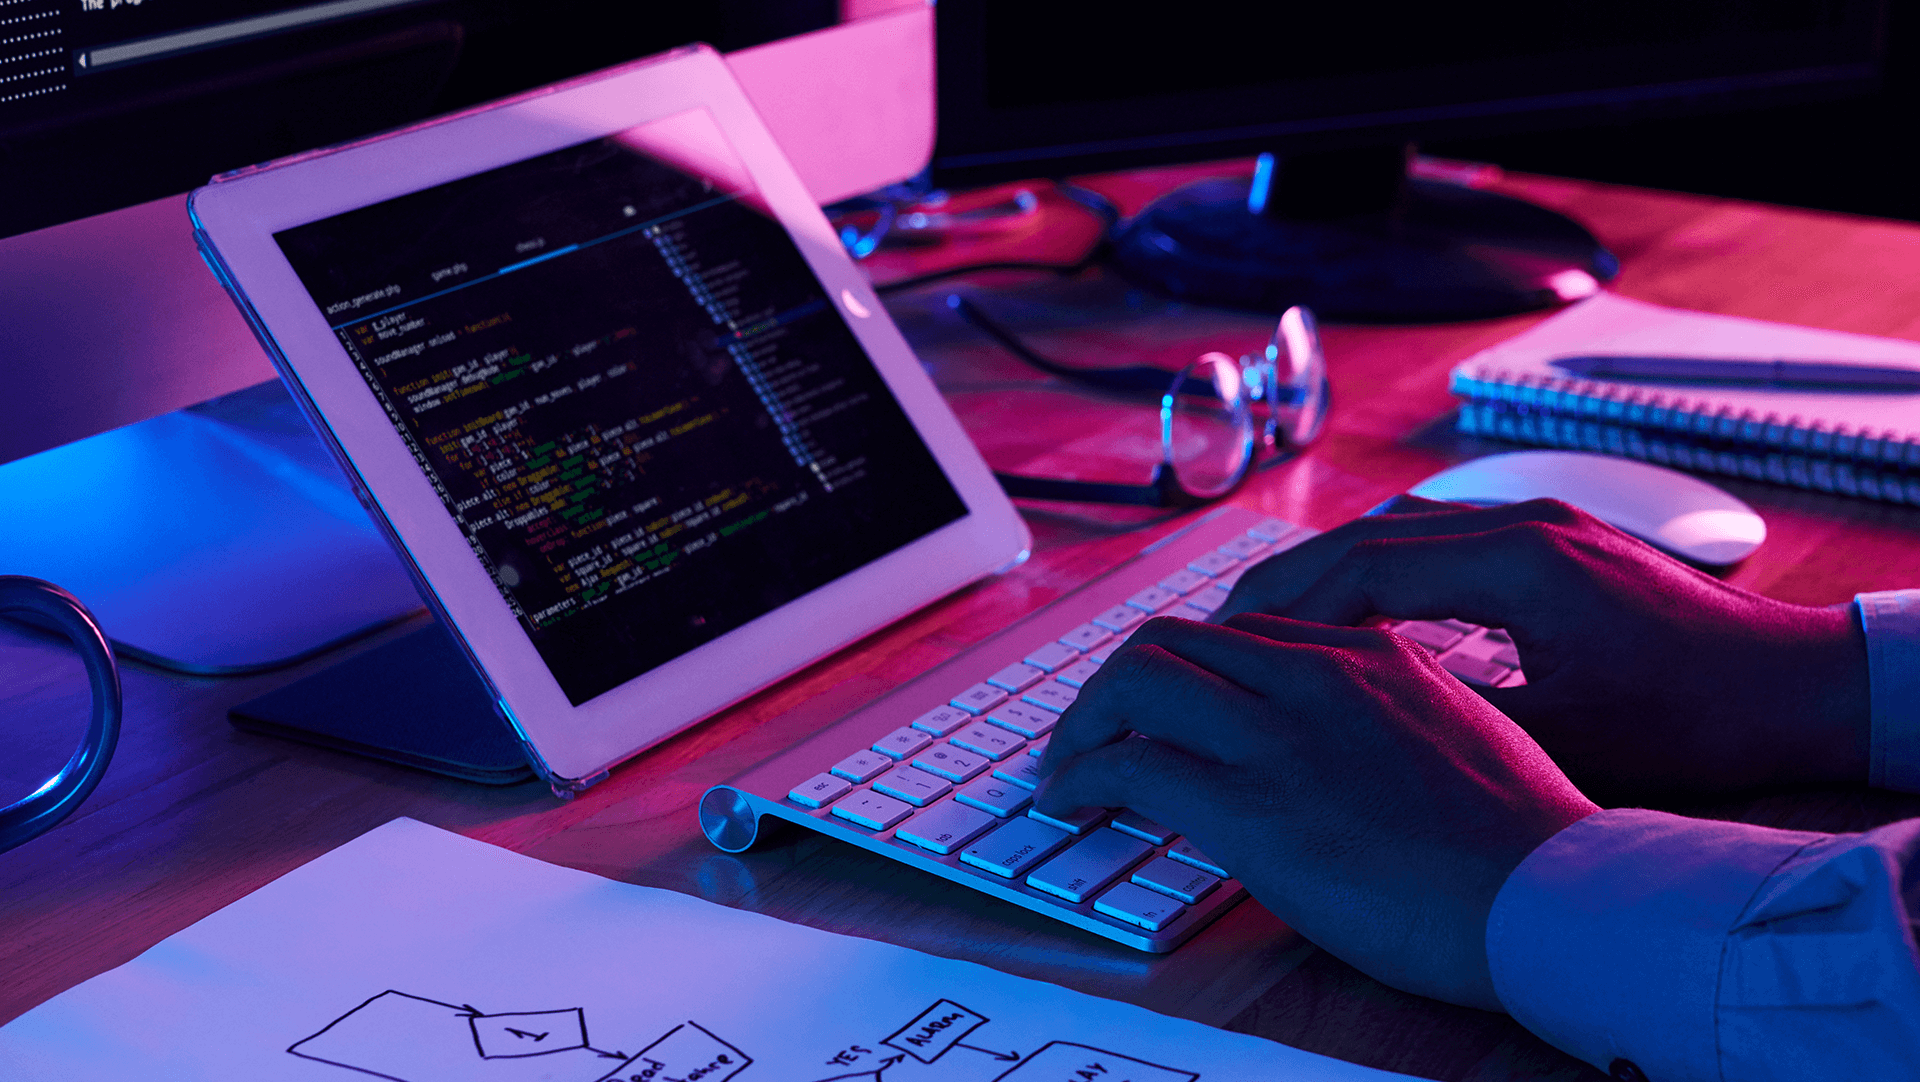 A developer working late at night, typing on a keyboard with a focus on coding and system architecture, illuminated by the glow of multiple screens.